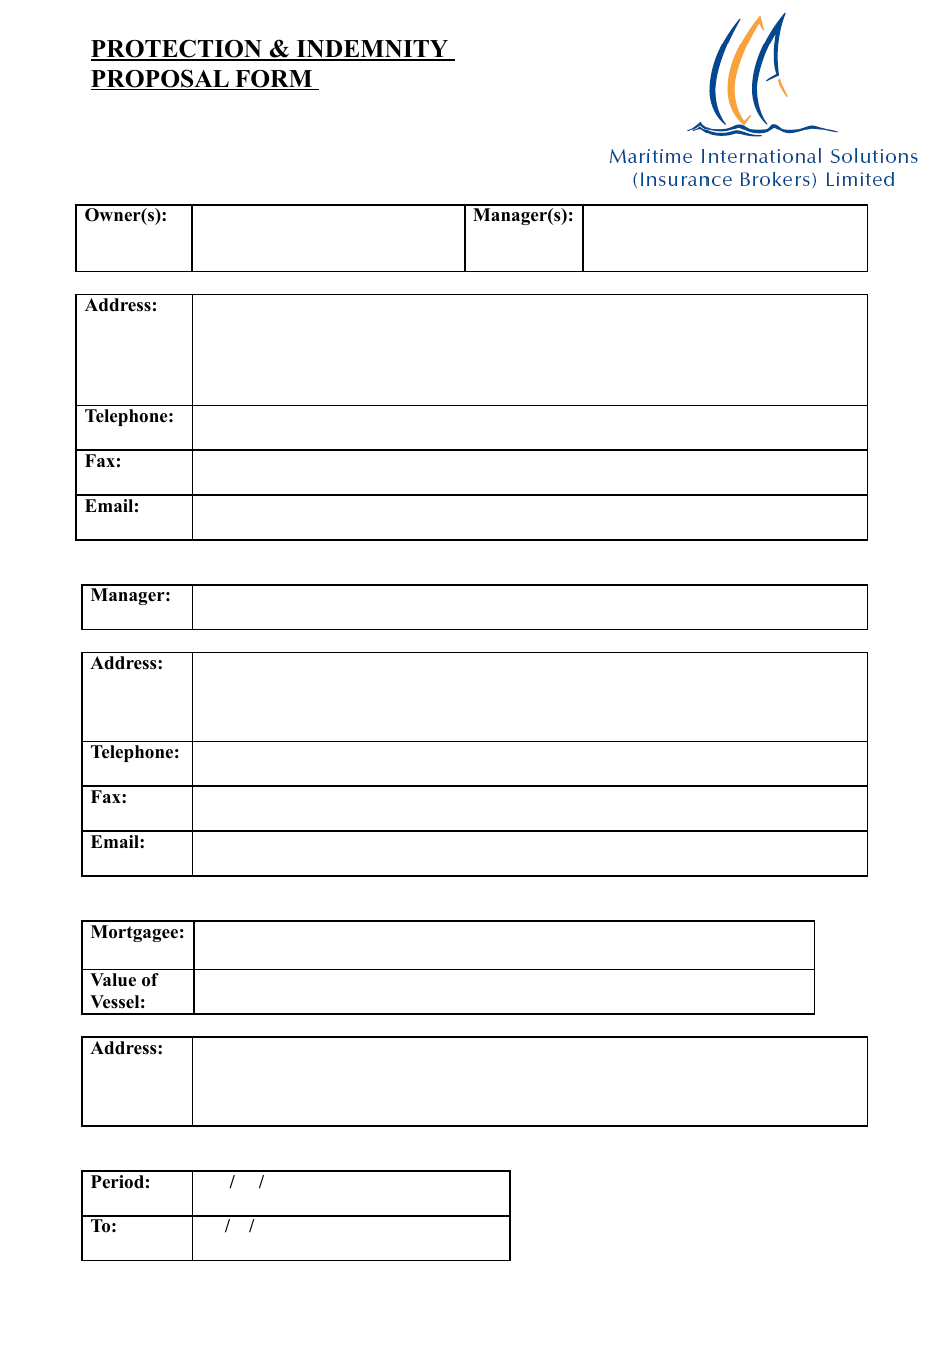 Protection and Indemnity Proposal Form - Maritime International Solutions (Insurance Brokers) Limited, Page 1